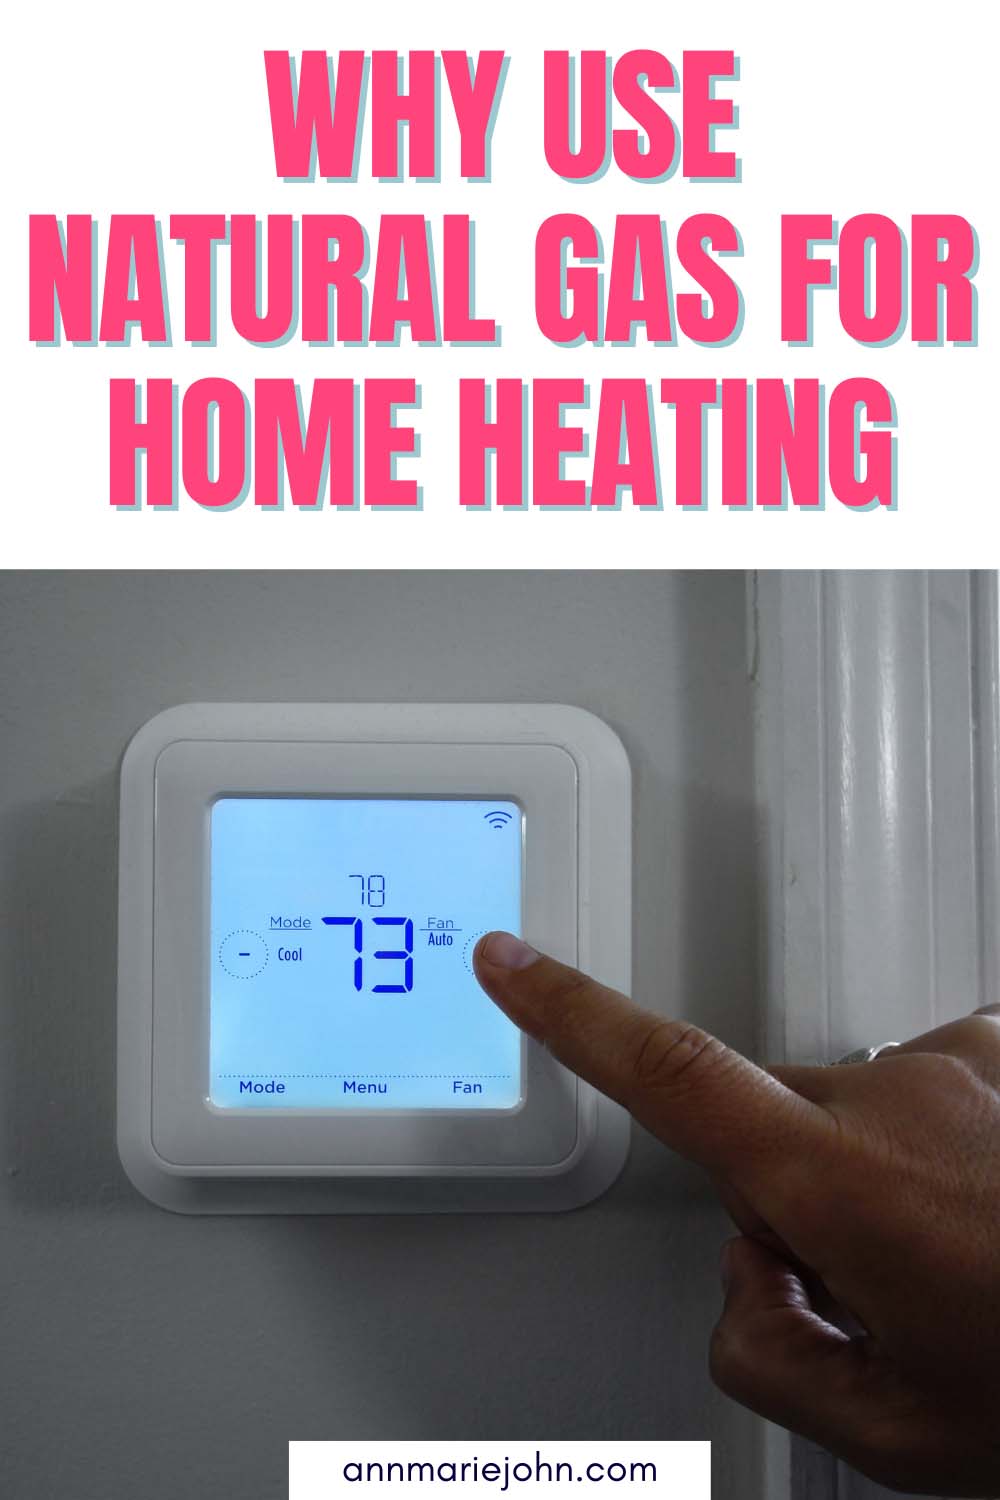 Why Use Natural Gas for Home Heating